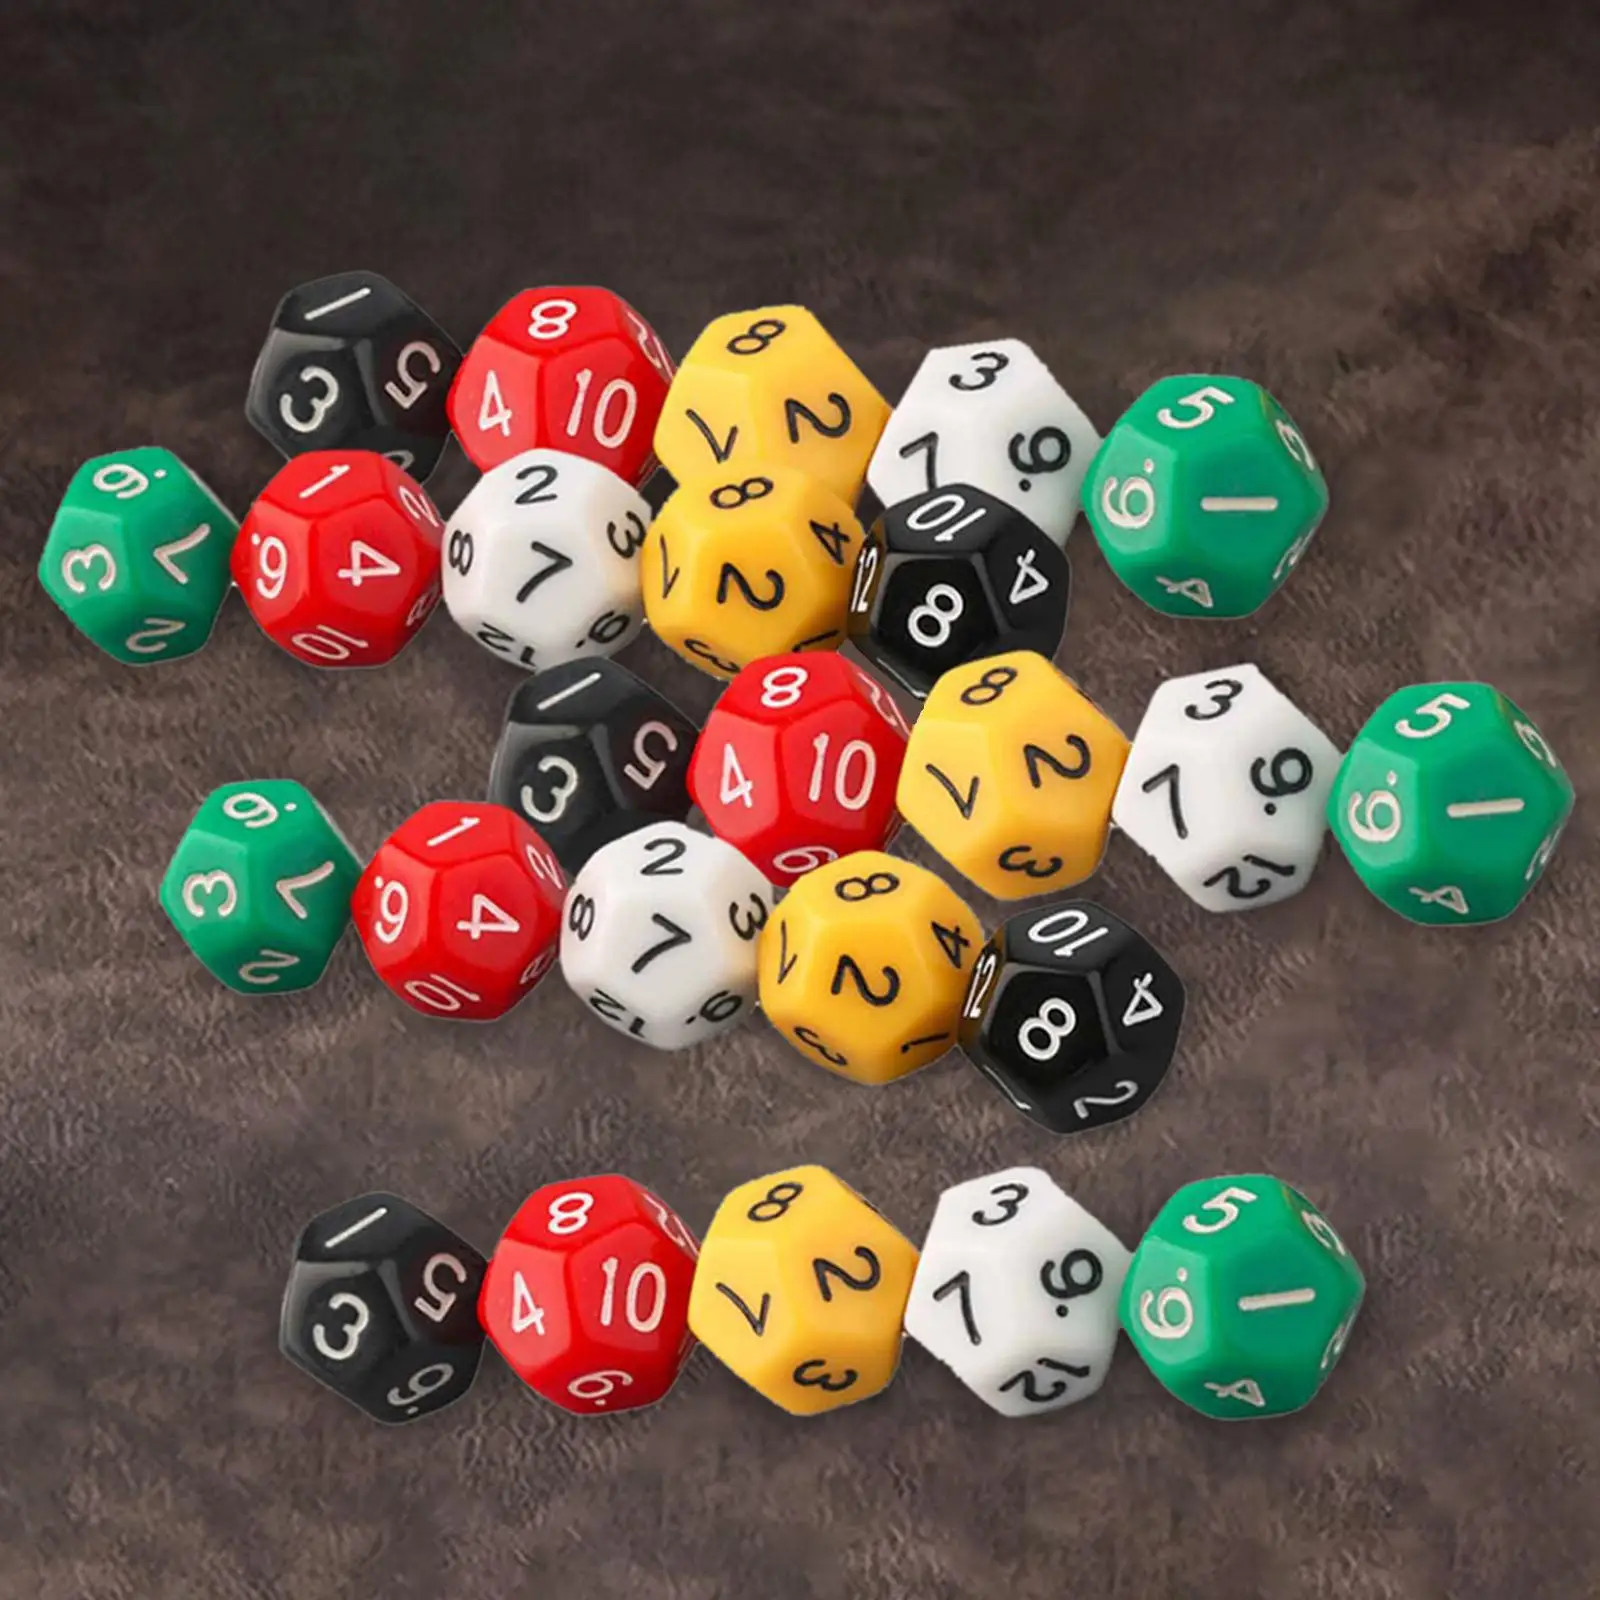 25Pcs Polyhedral Dice Collections Board Game Multisided Dice for Role Playing